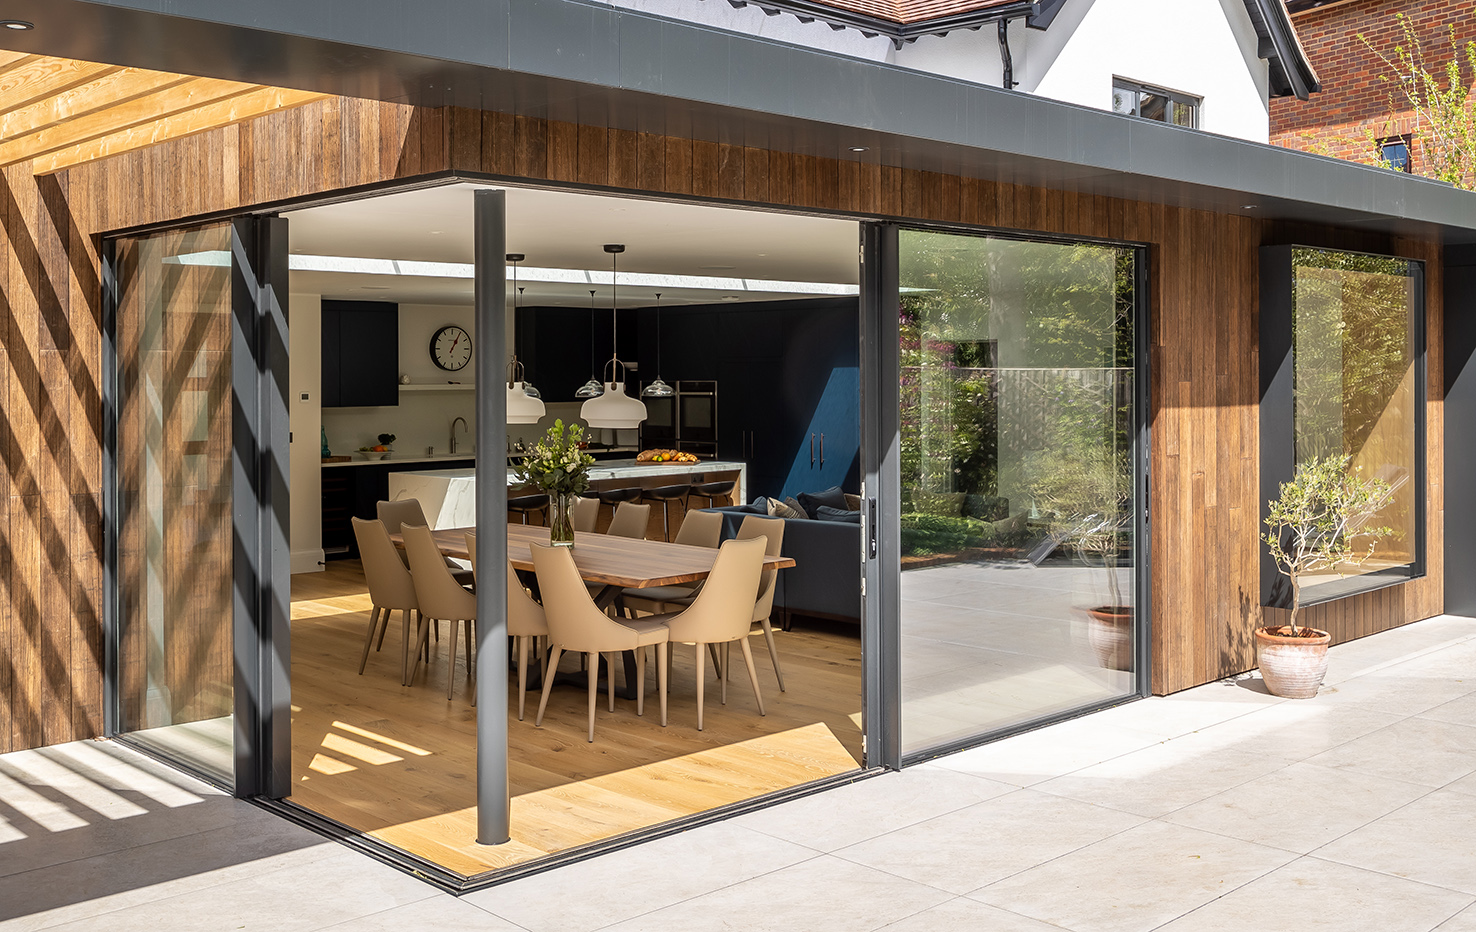 Corner glazing created by two sets of sliding doors